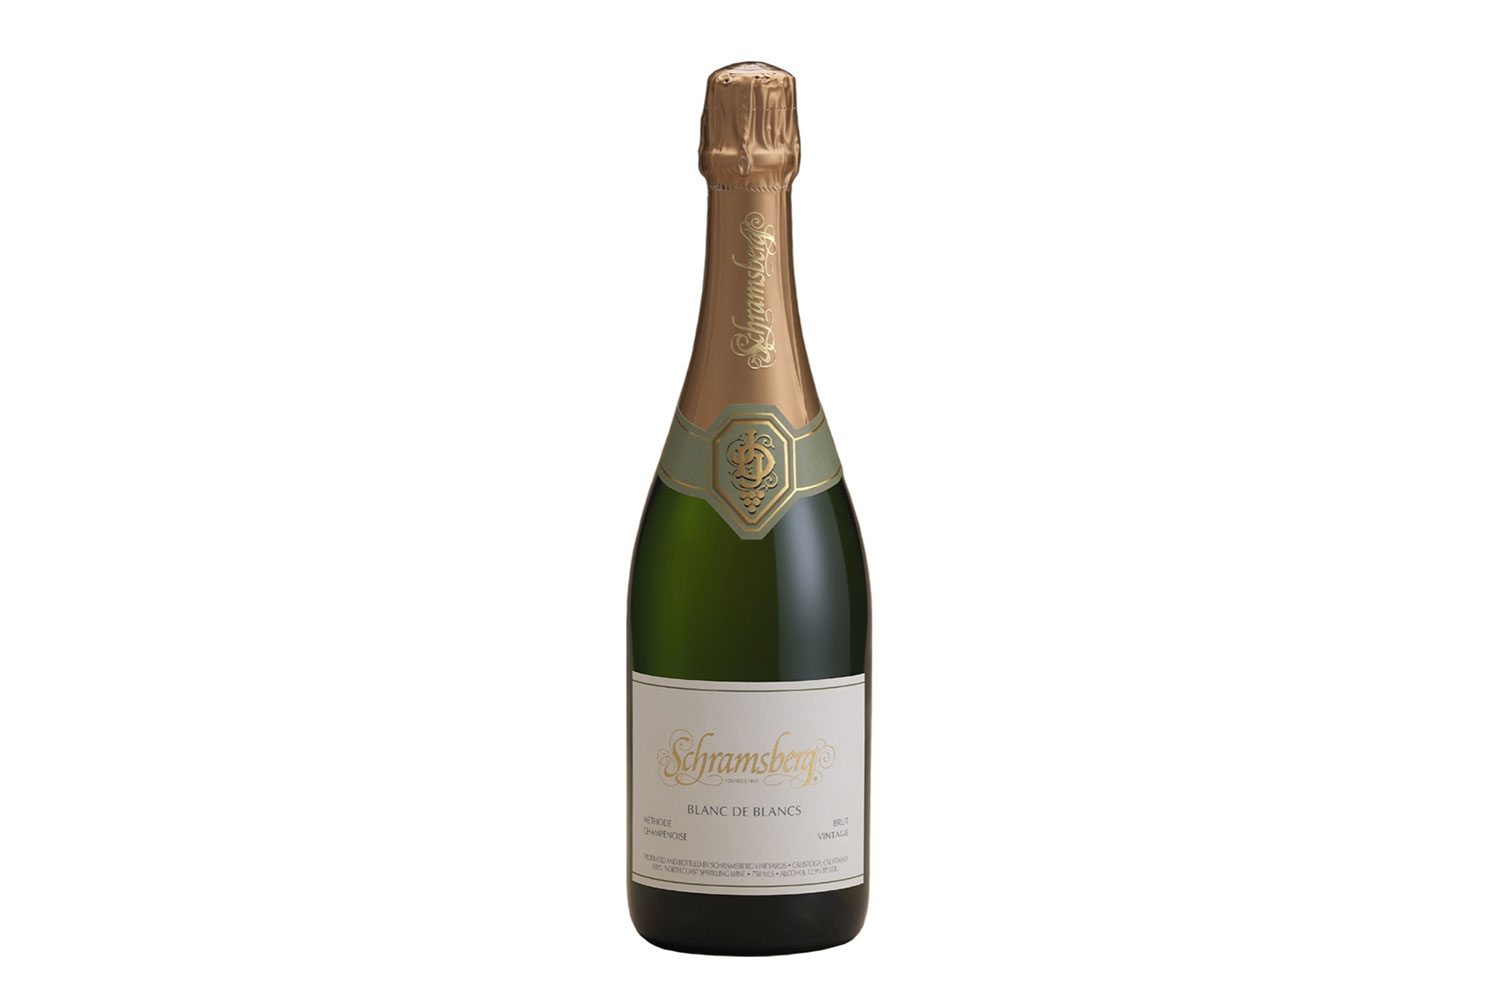 10 Must-Try Blanc de Blancs, According To Wine Experts - The Manual